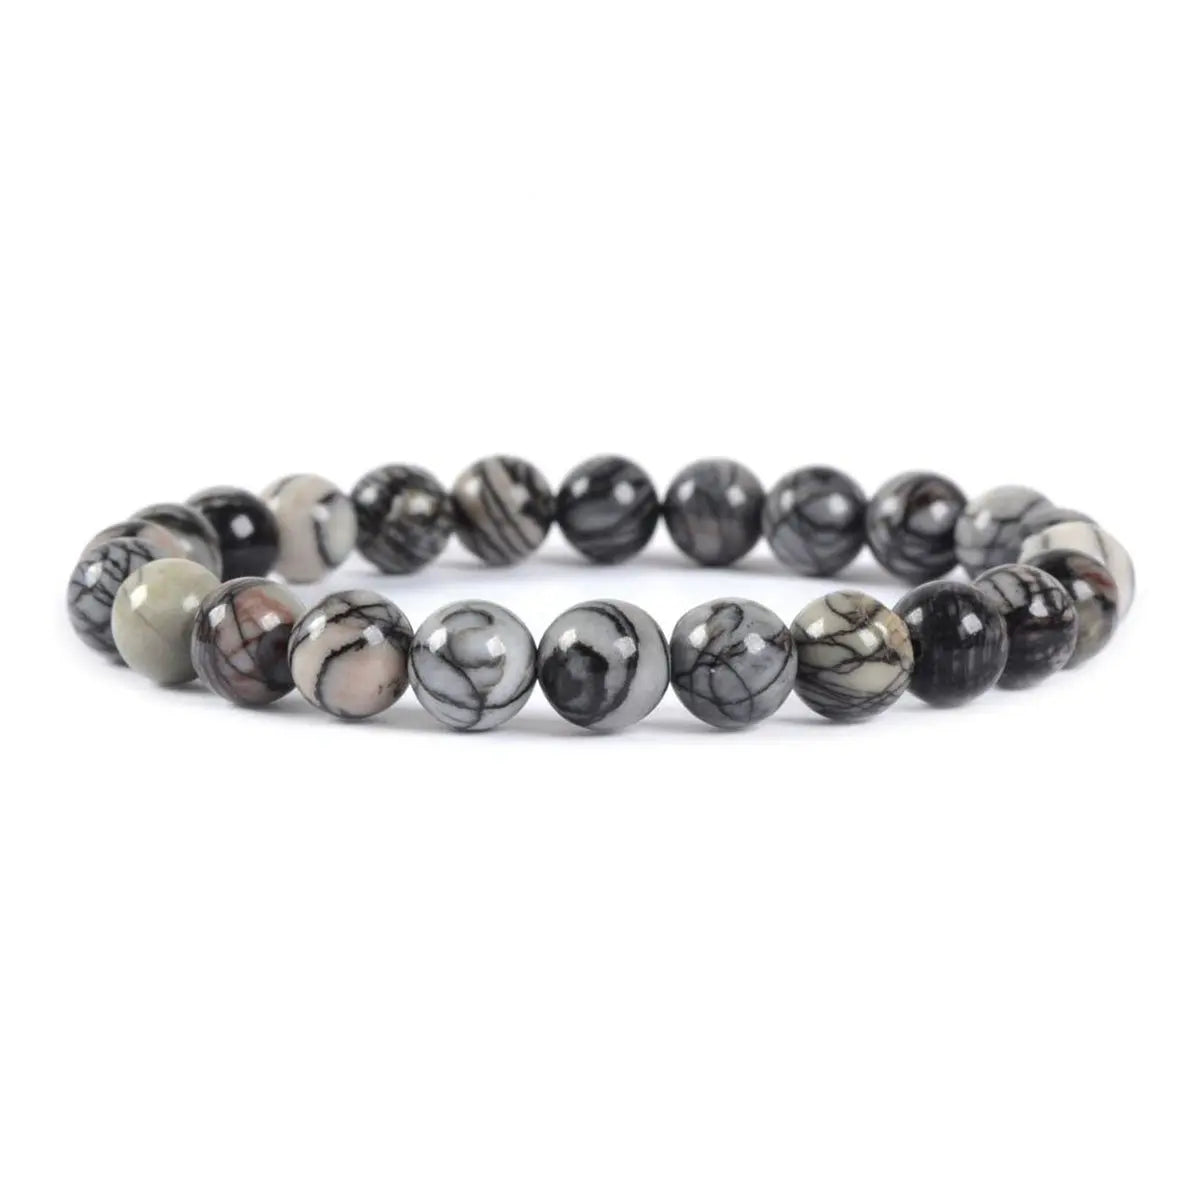 Round Beads Stretch Bracelet 7 Inch Unisex - 47 Different Crystals Healing Crystal Home